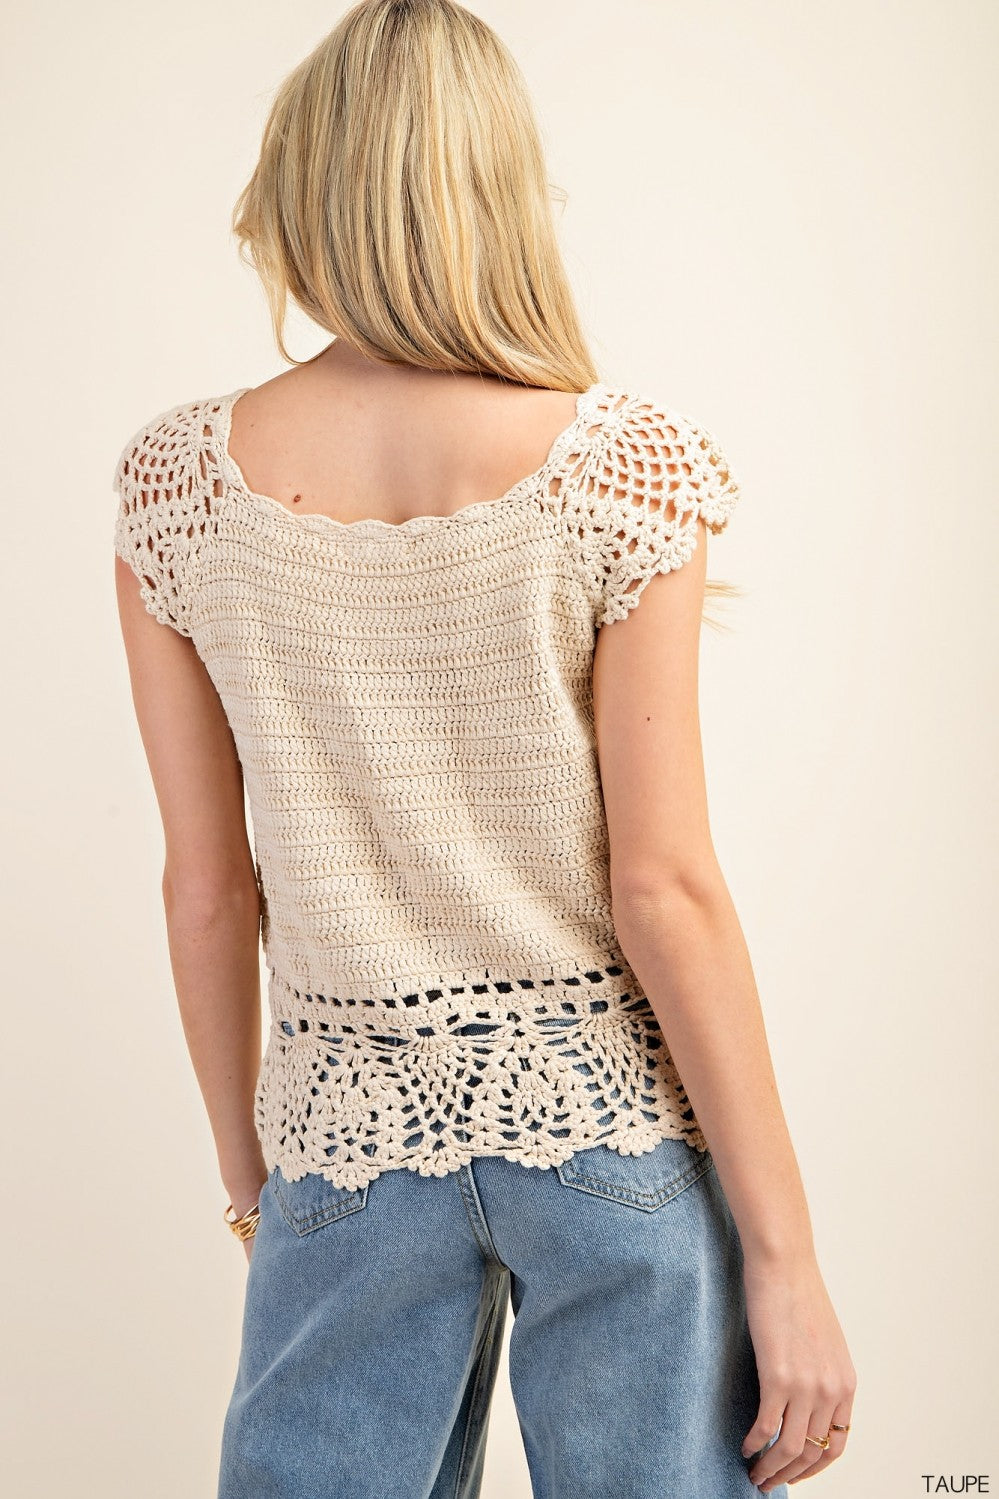 Taupe Crochet Scalloped Sweater